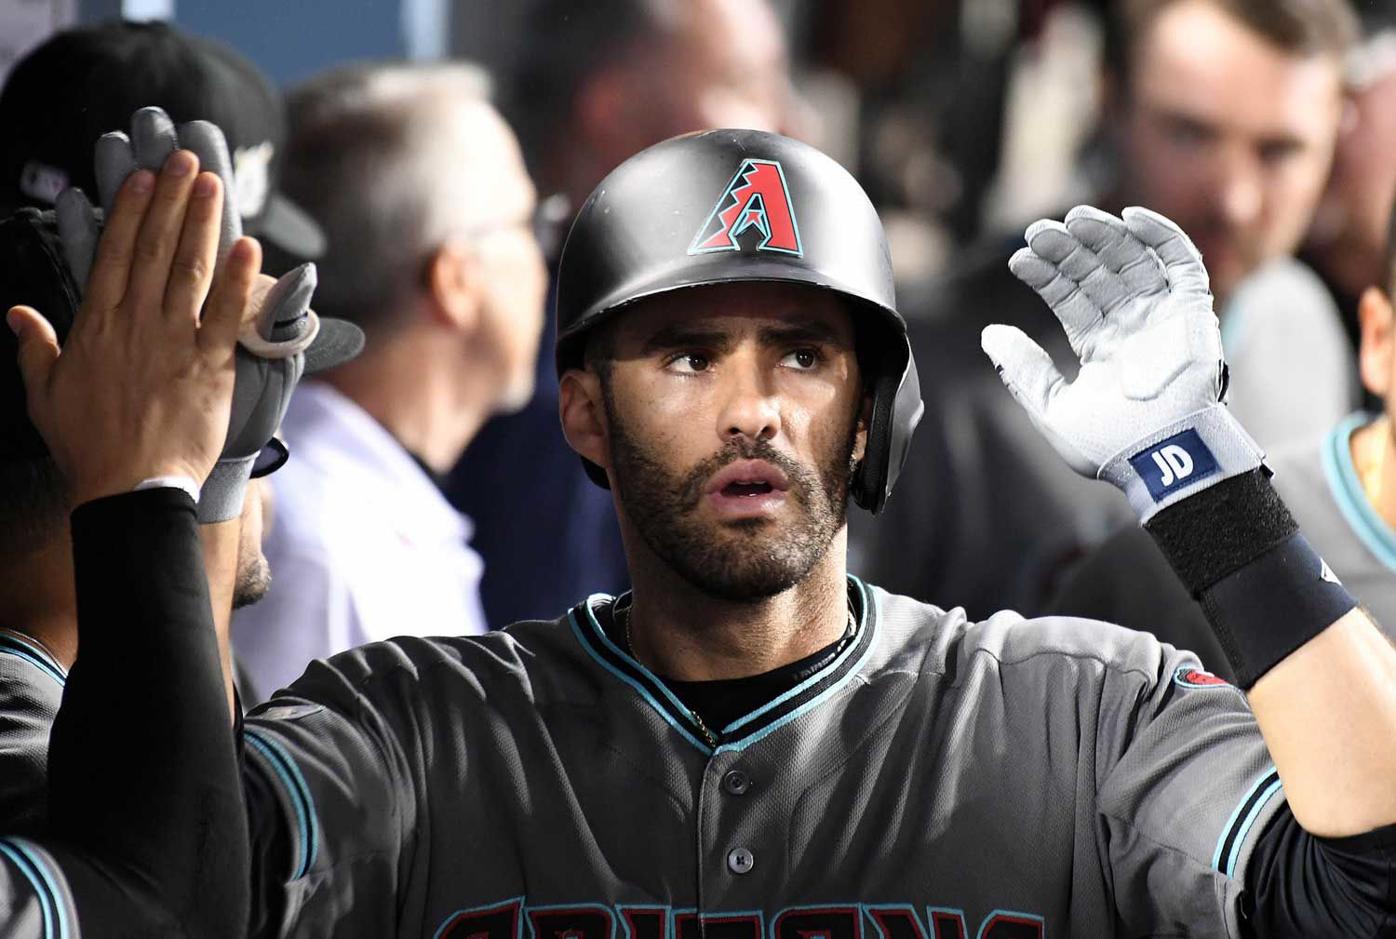 J.D. Martinez has been out of sorts at the plate, but three-hit